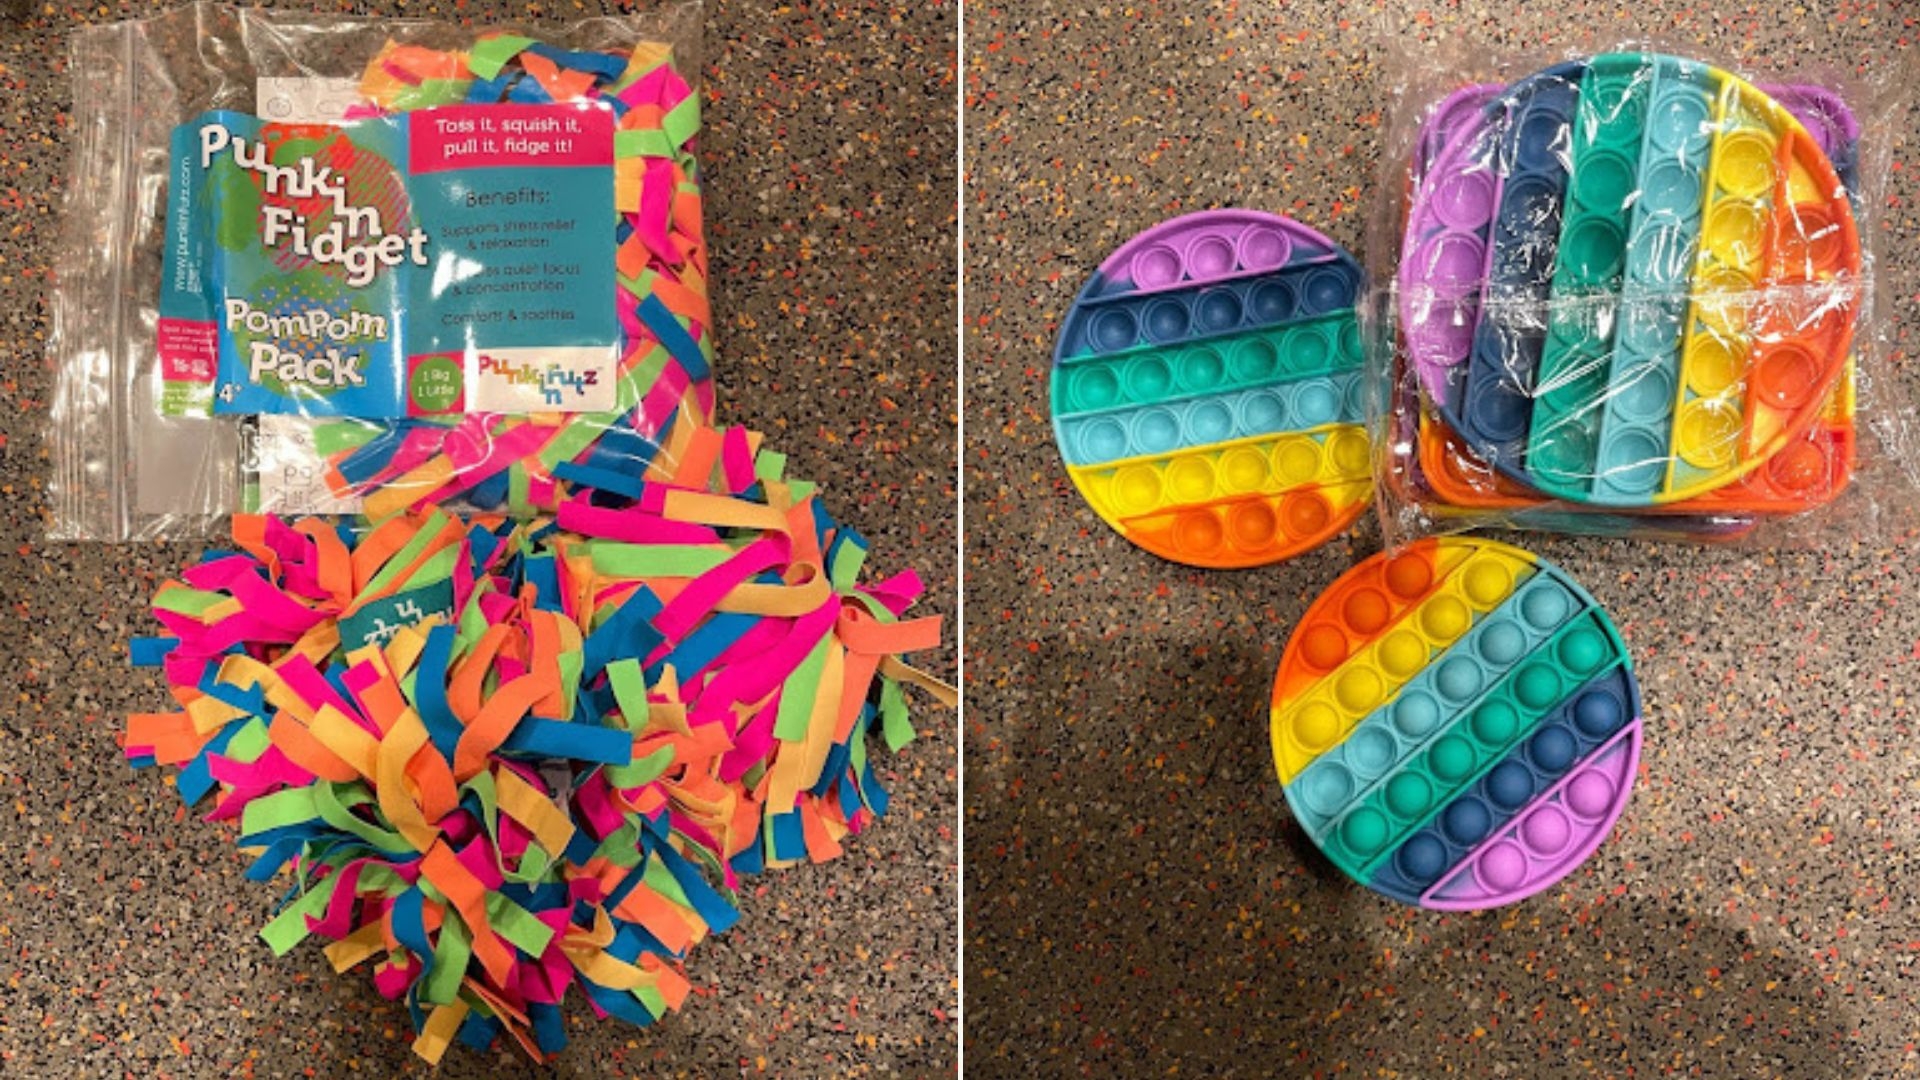 Two side-by-side images of colorful fidget toys. On the left are fabric pom poms and on the right are rainbow silicon bubble push poppers.